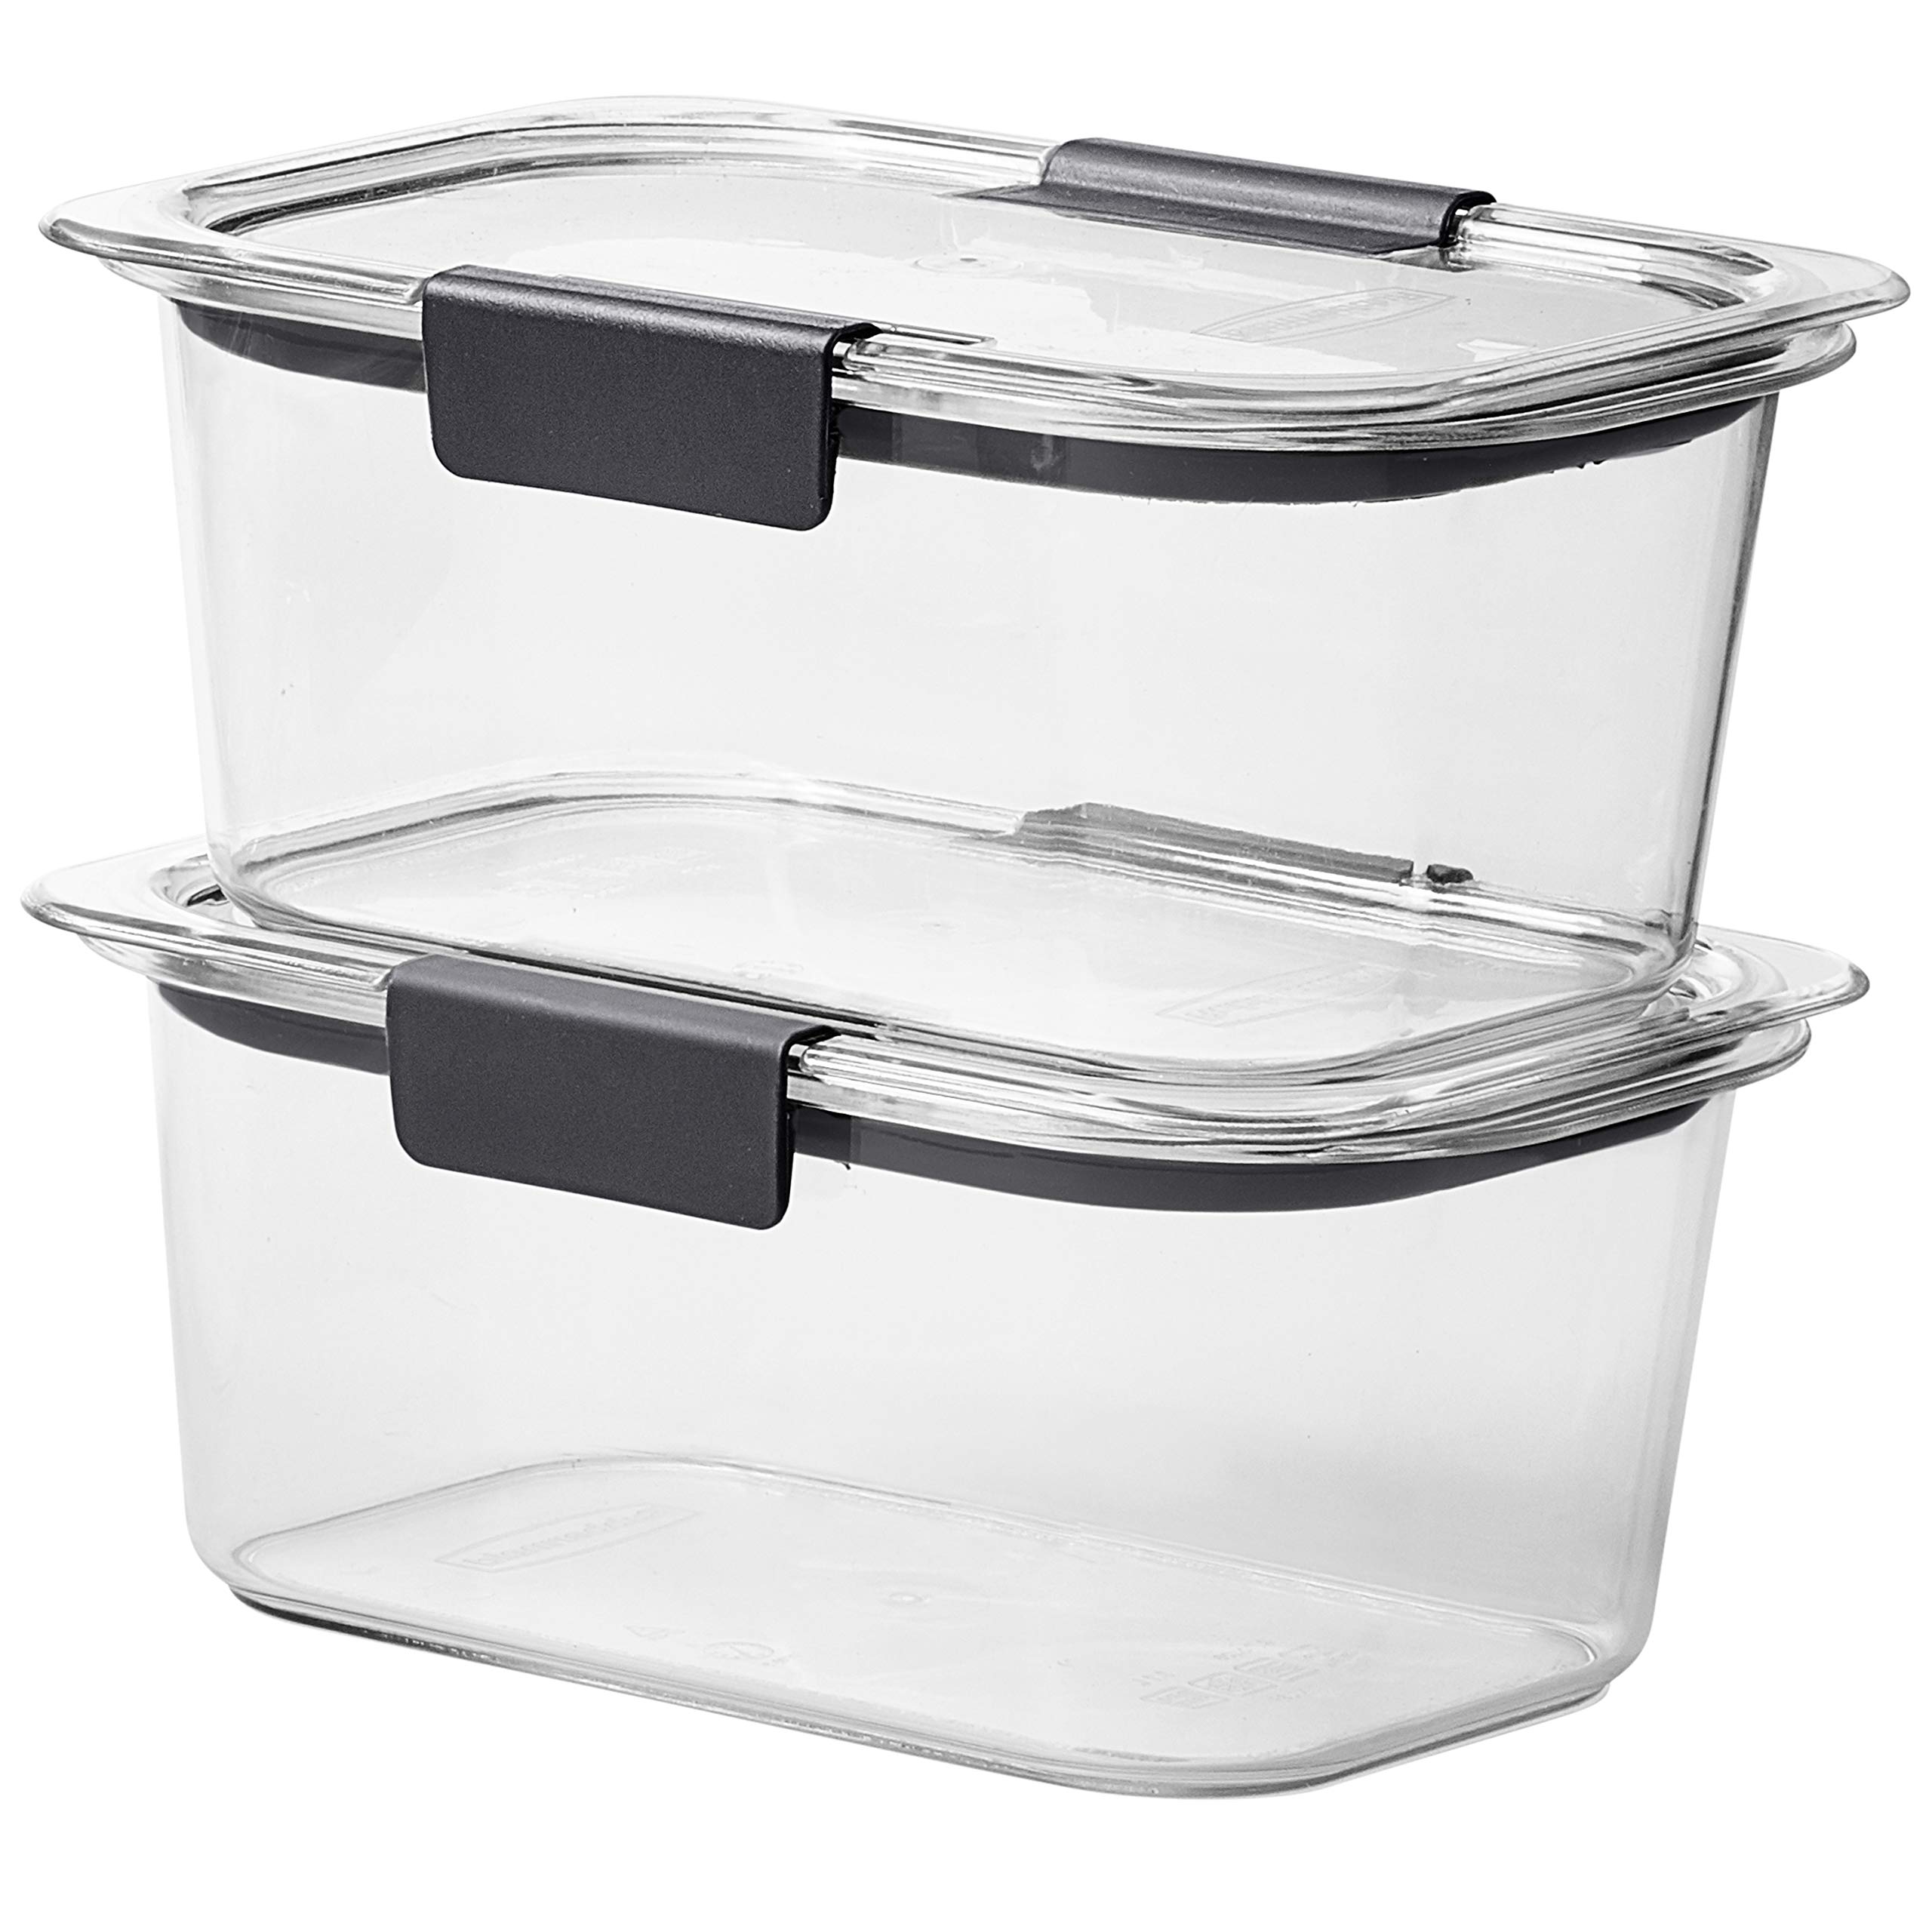 Rubbermaid Brilliance BPA Free Food Storage Containers ...